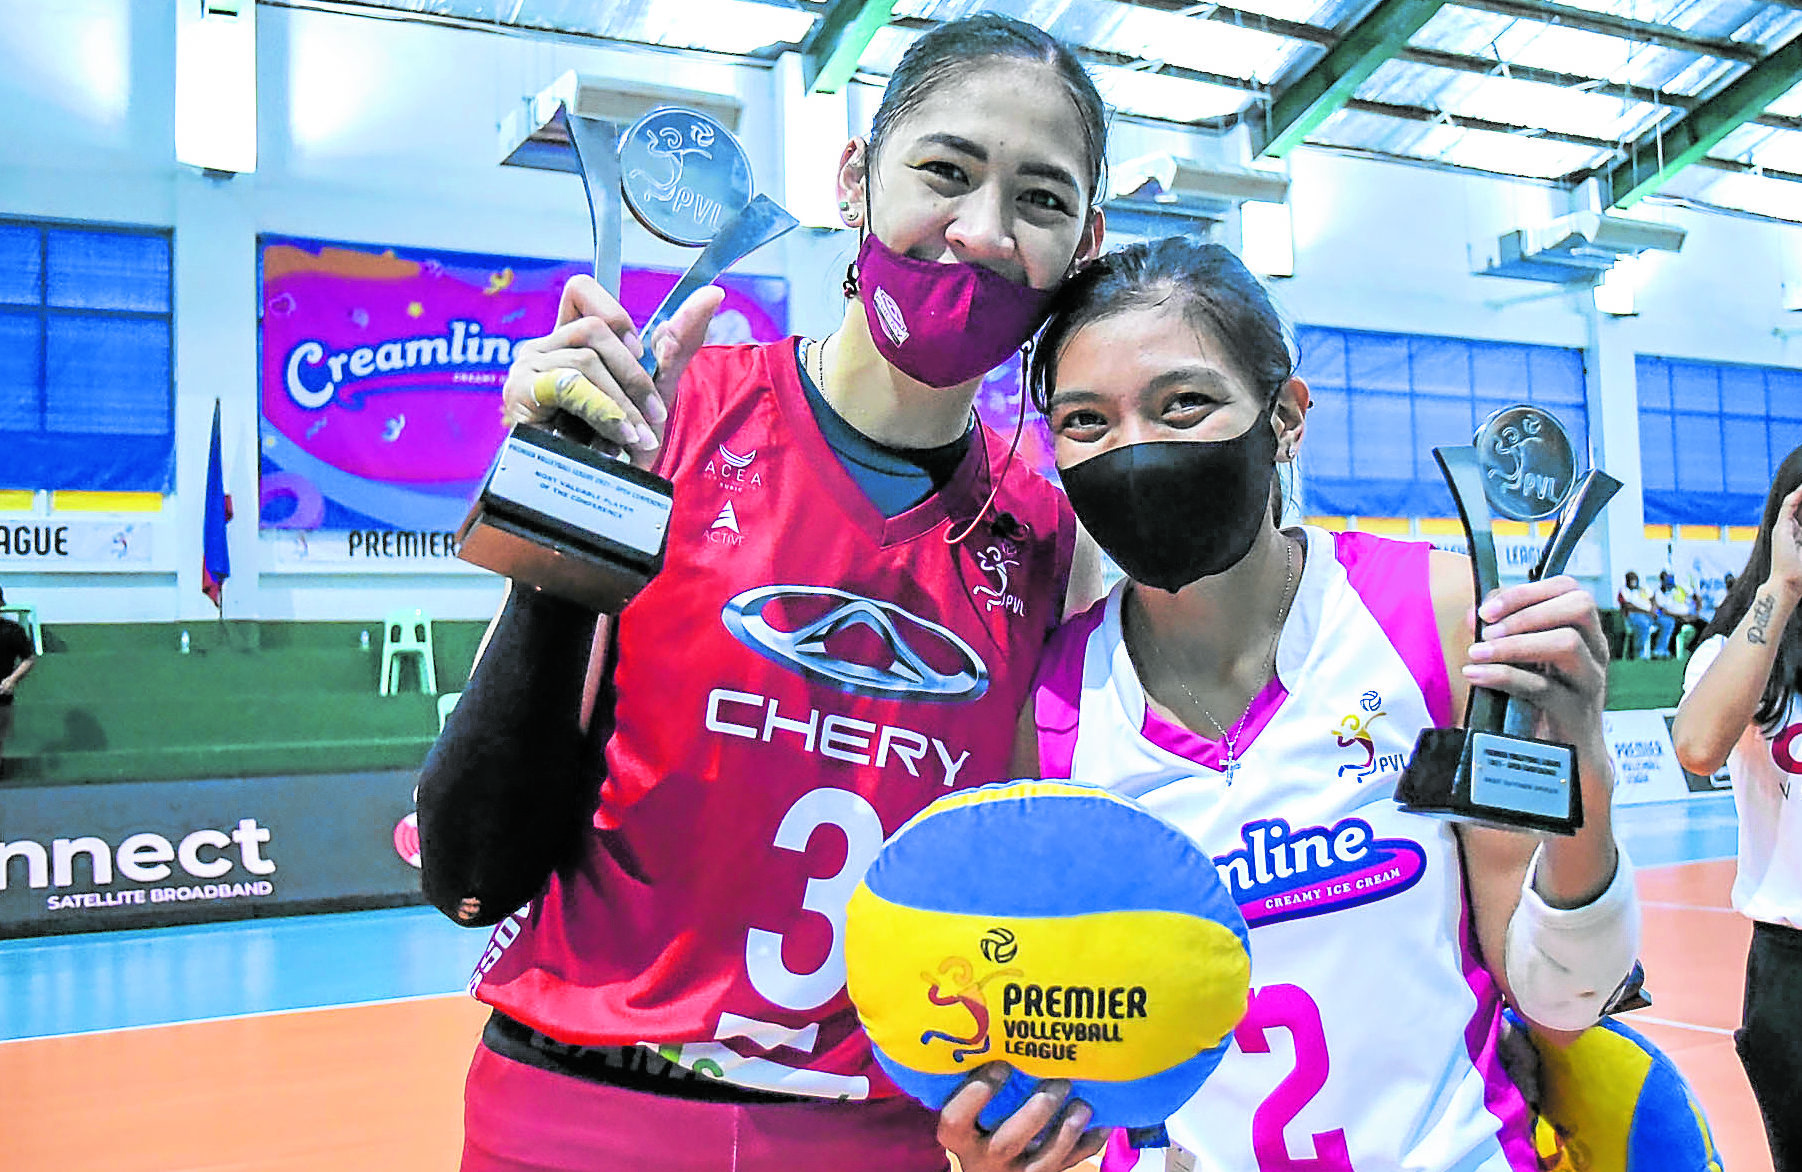 Jaja Santiago (left) and Alyssa Valdez are generally regarded as the two best players in the country today.